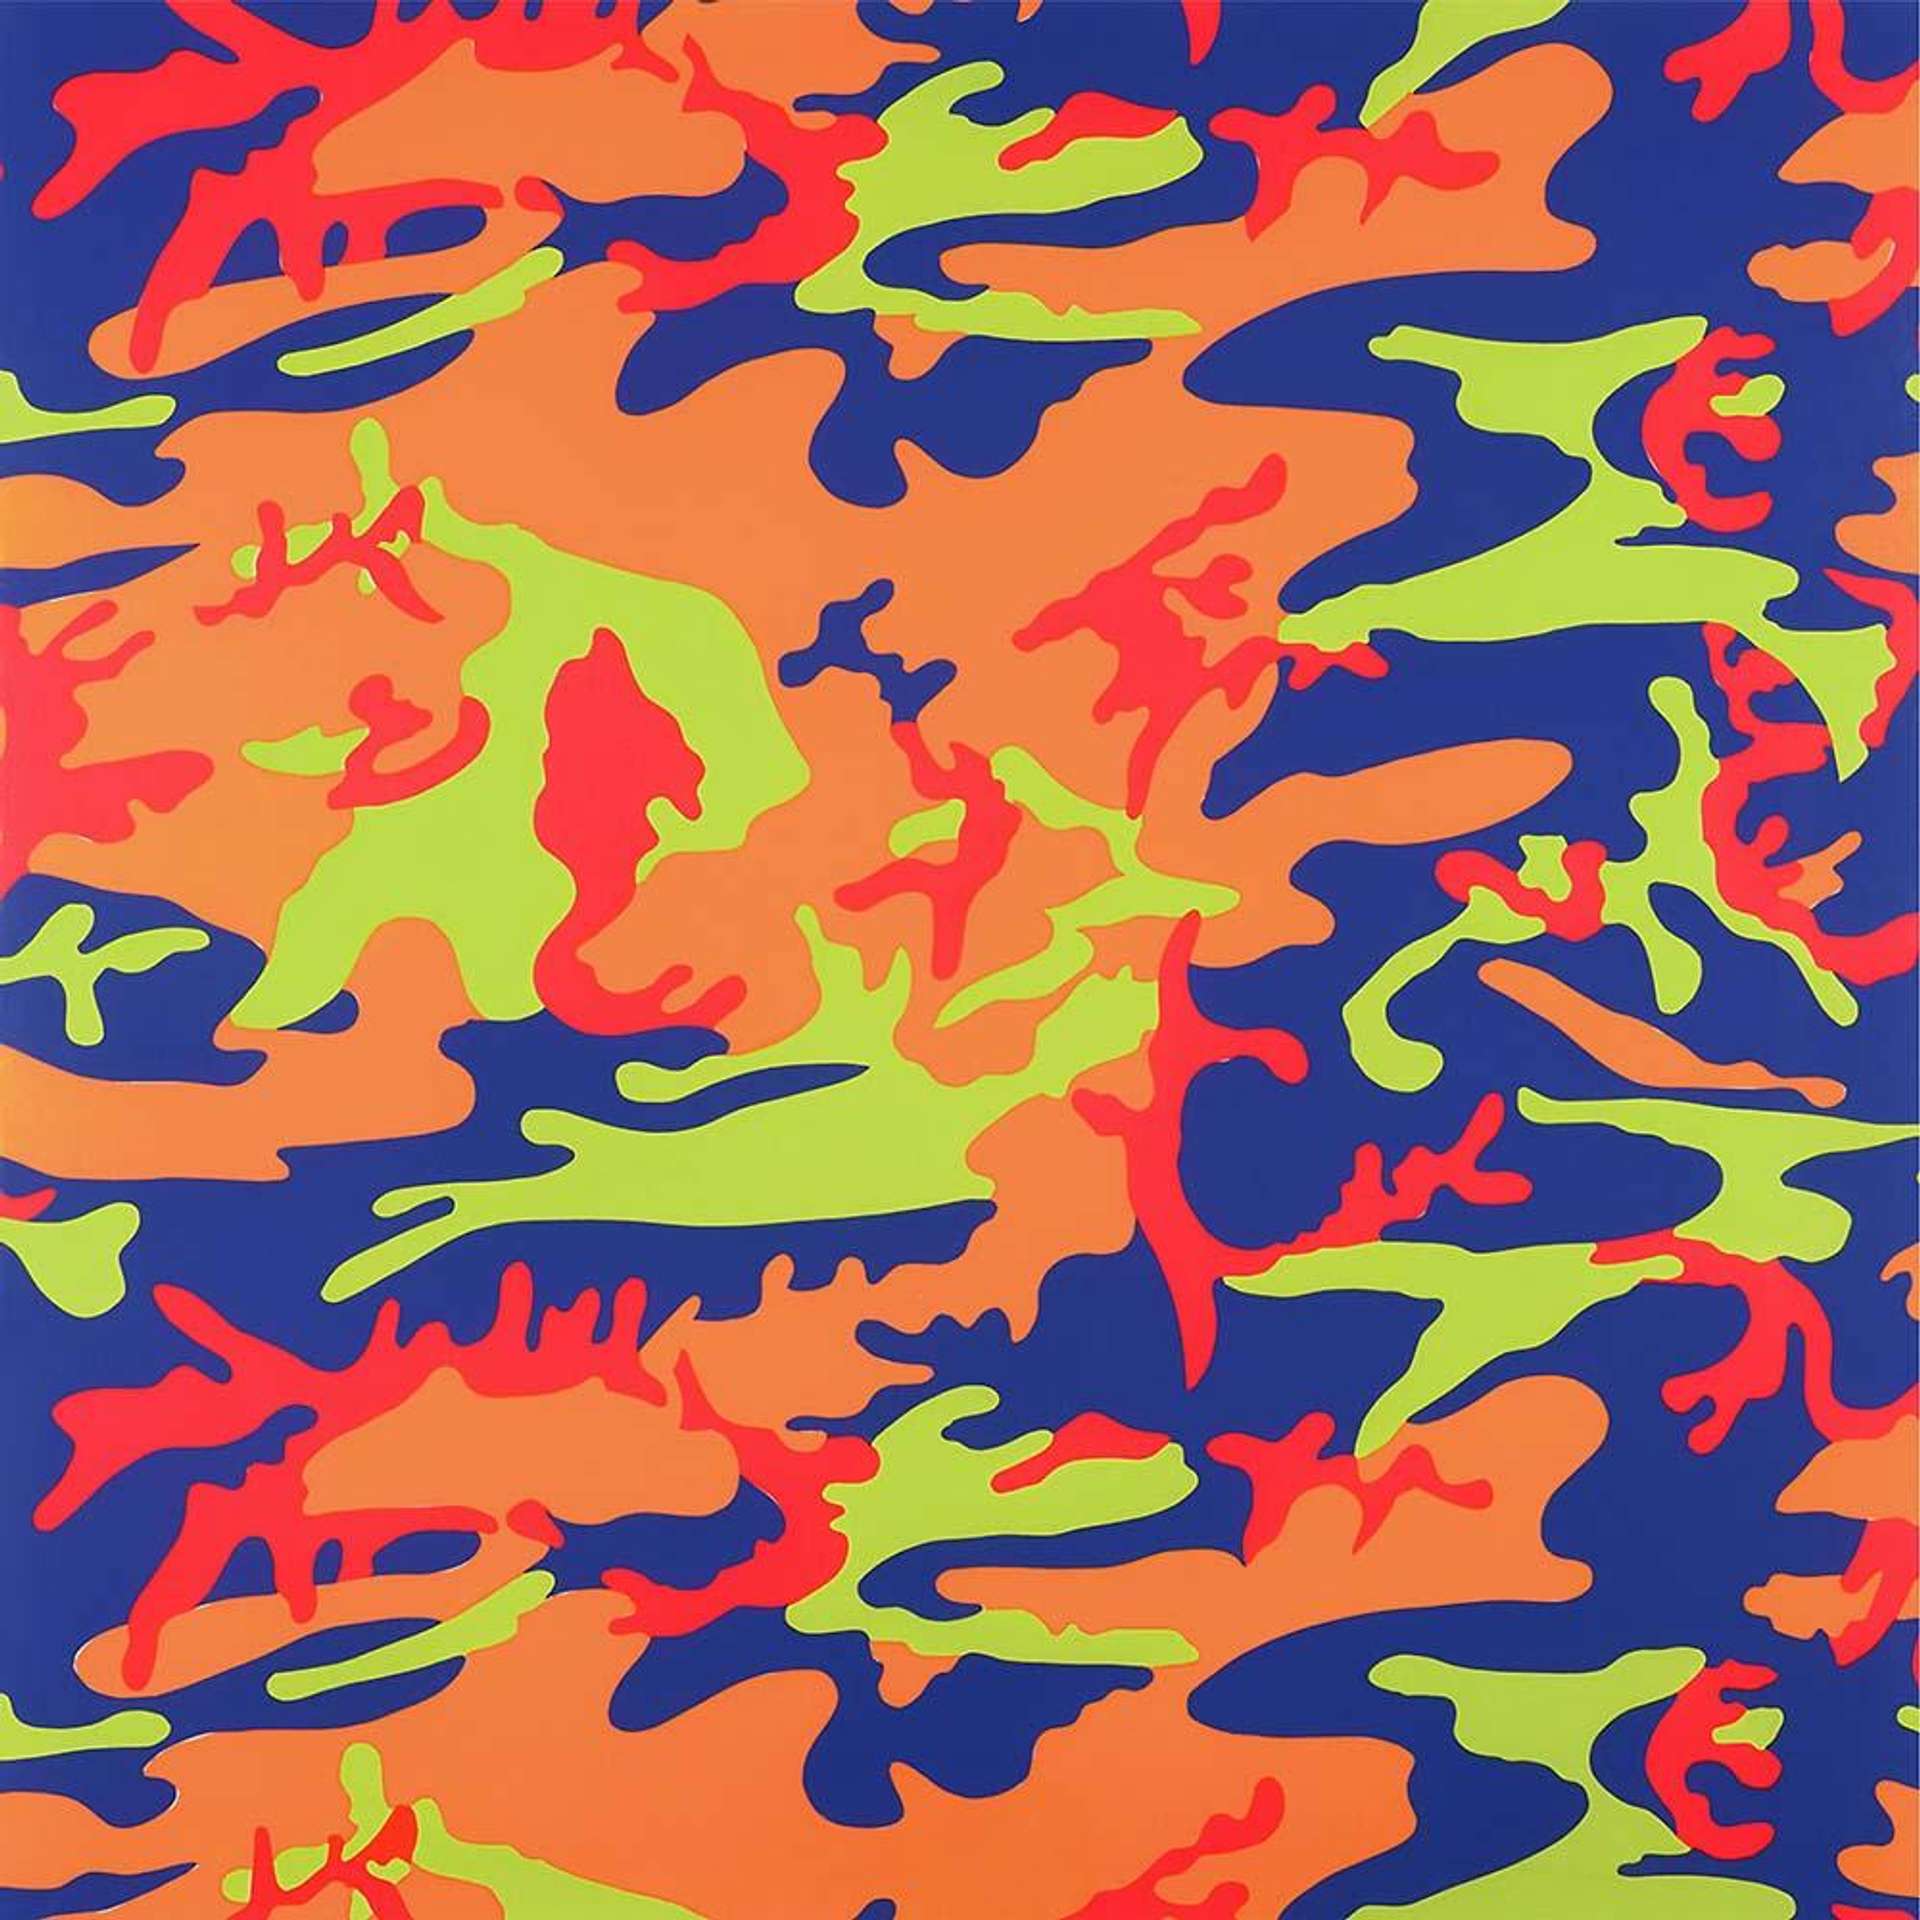 Camouflage (F. & S. II.412) - Signed Print by Andy Warhol 1987 - MyArtBroker